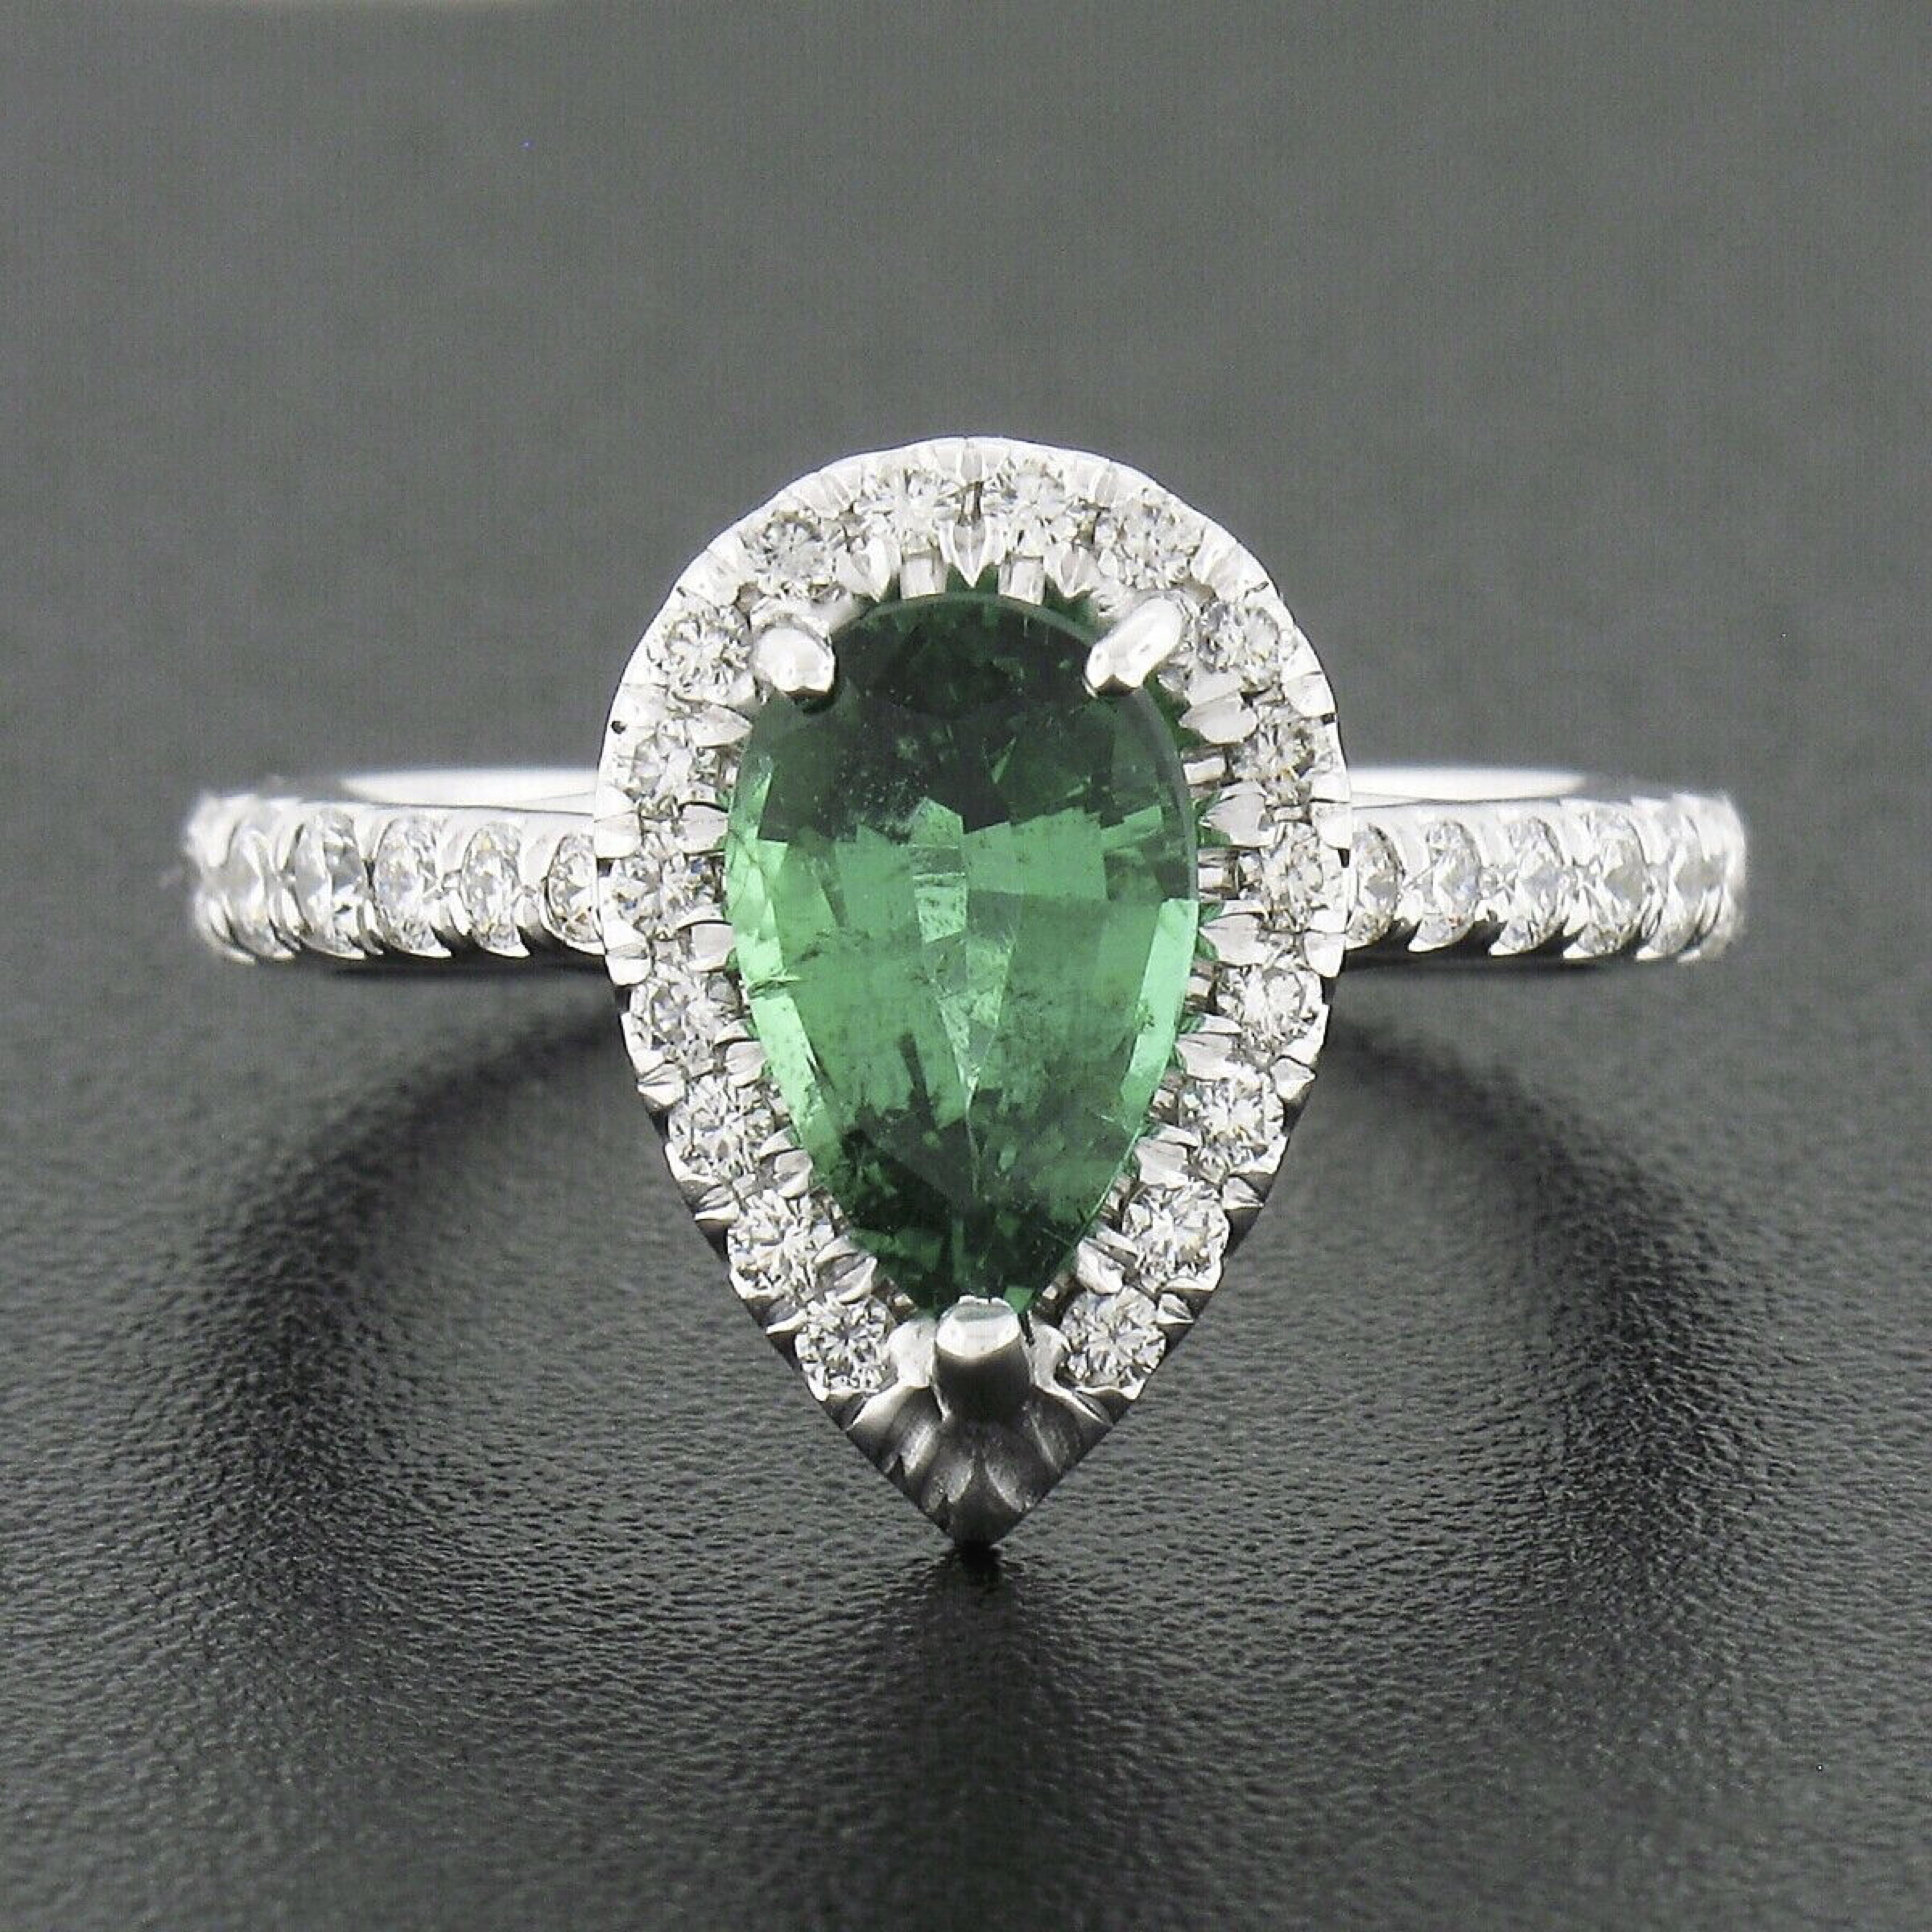 Up for sale is a truly gorgeous emerald and diamond engagement ring crafted in solid 18k white gold and features a breathtaking, 100% natural, pear brilliant cut emerald stone that displays the finest and most desirable vivid green color. This very